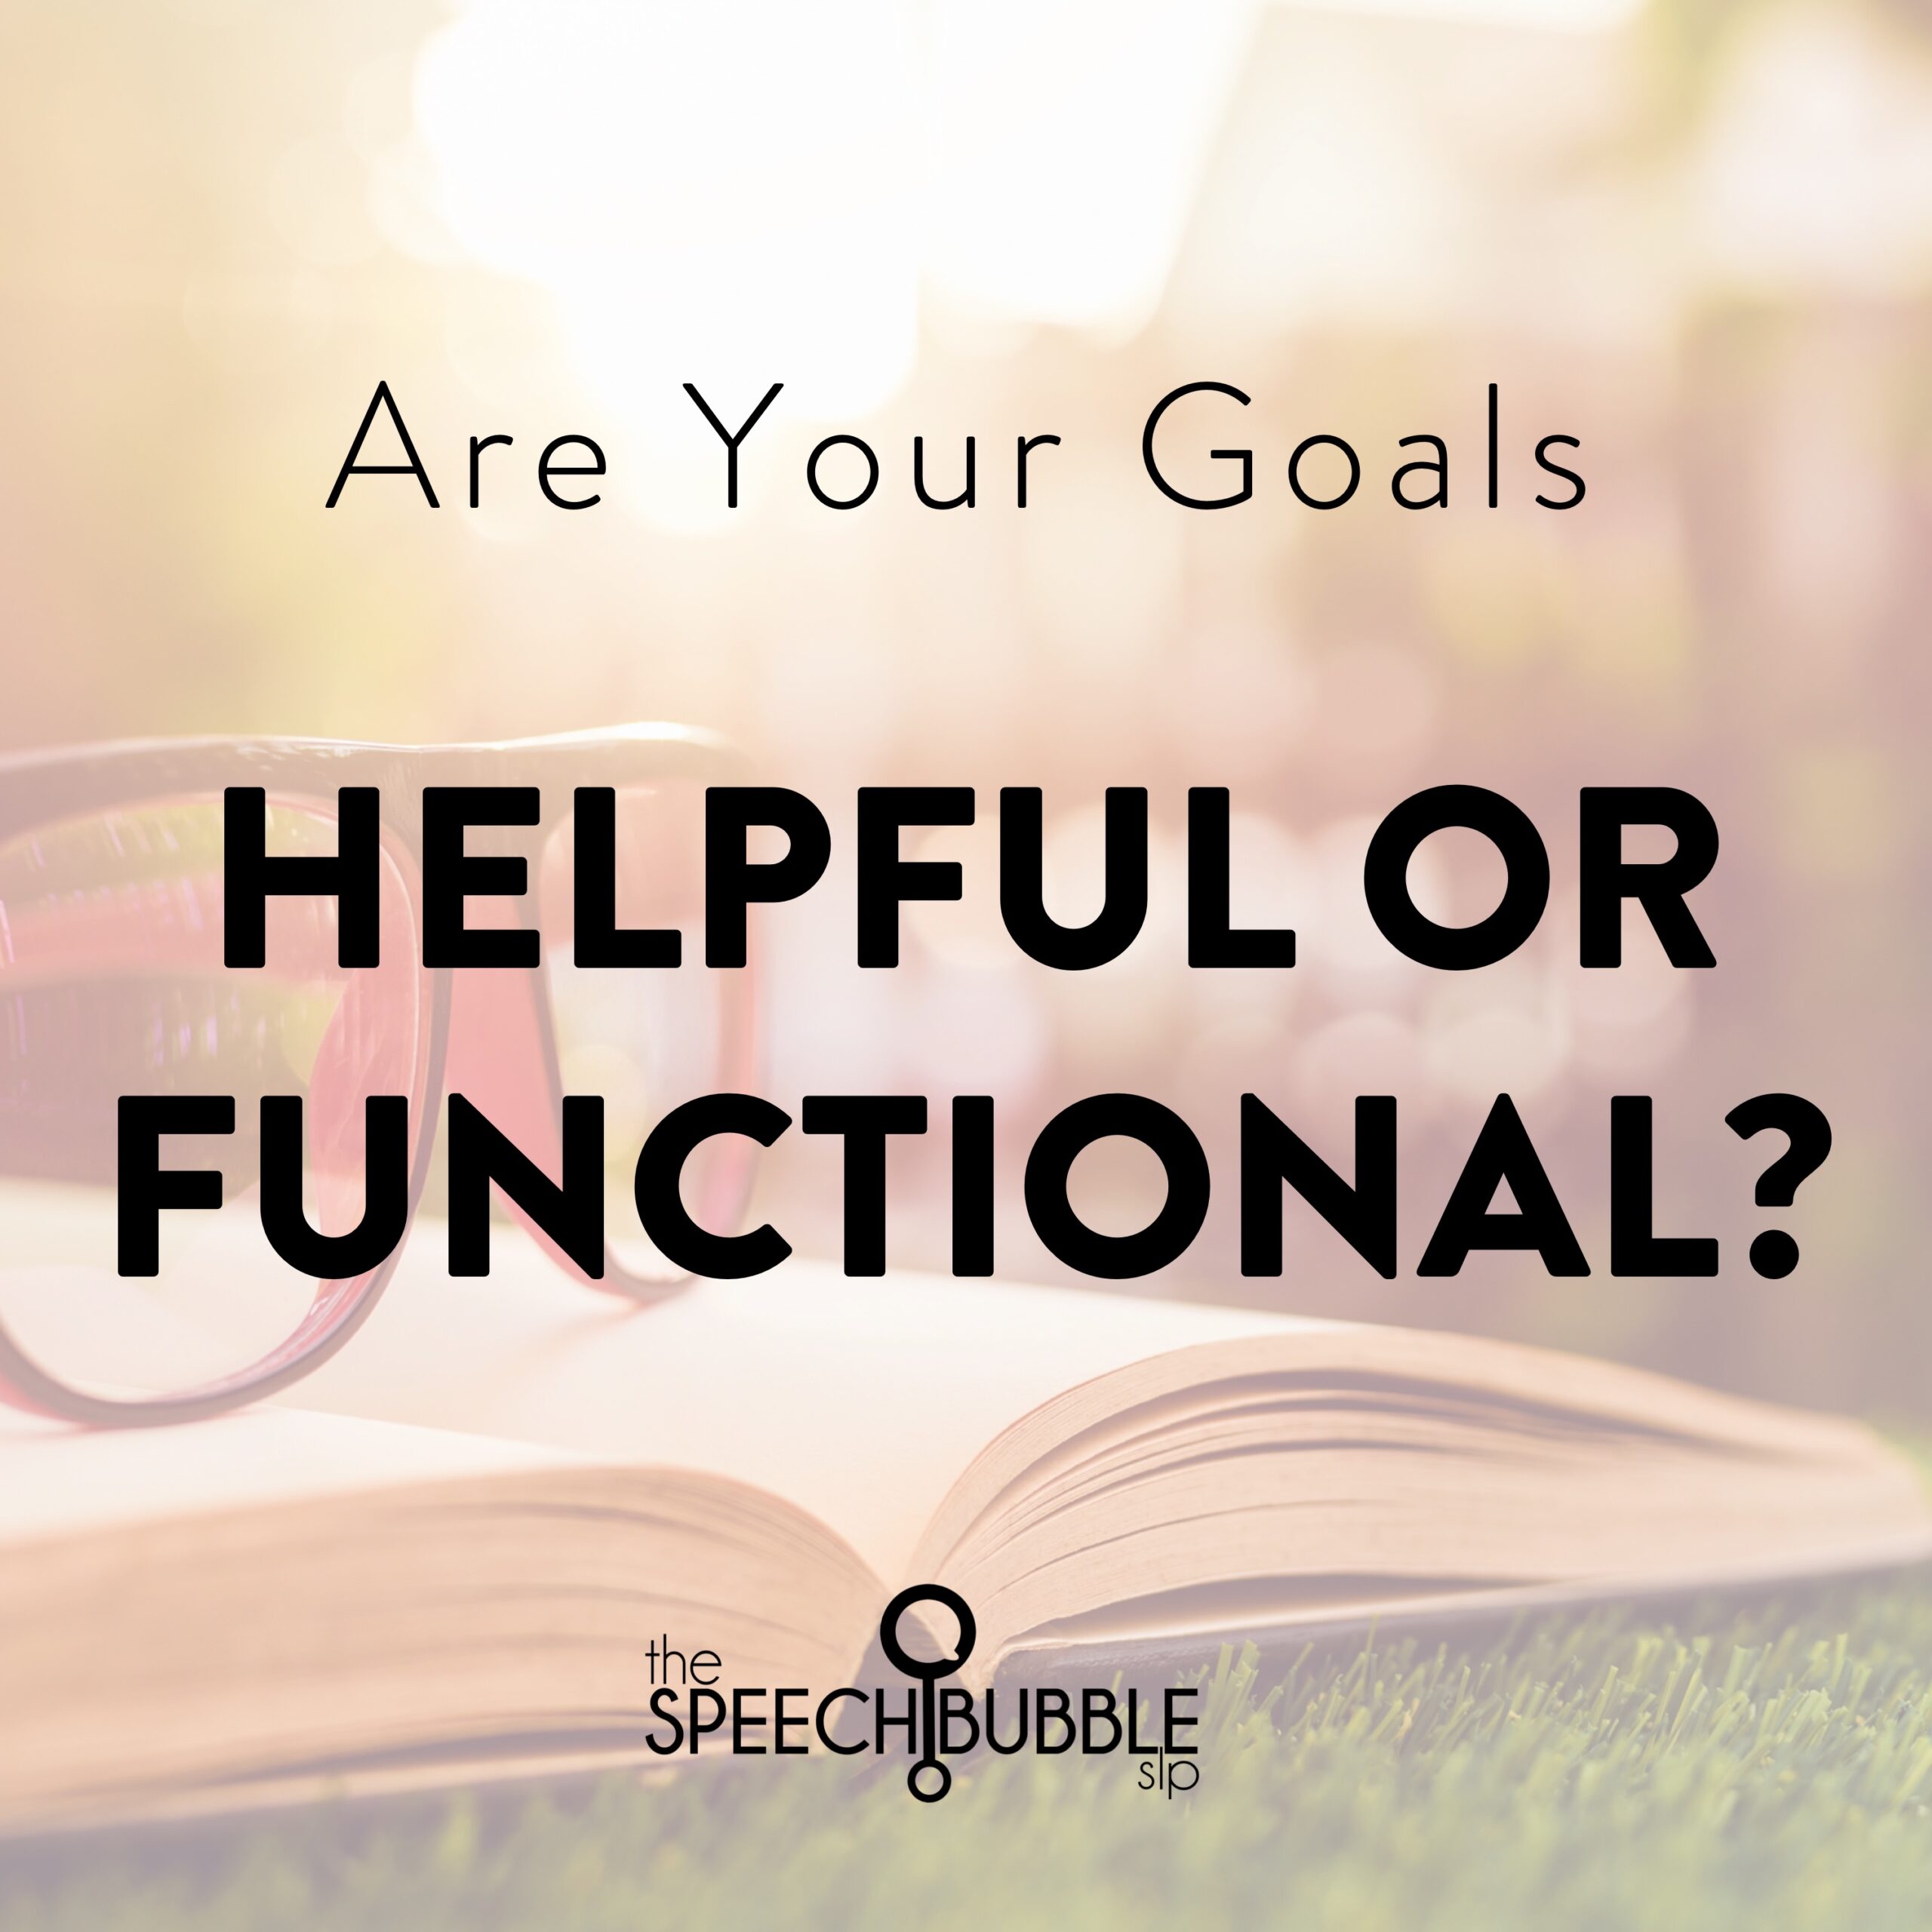 Are your goals helpful or functional?